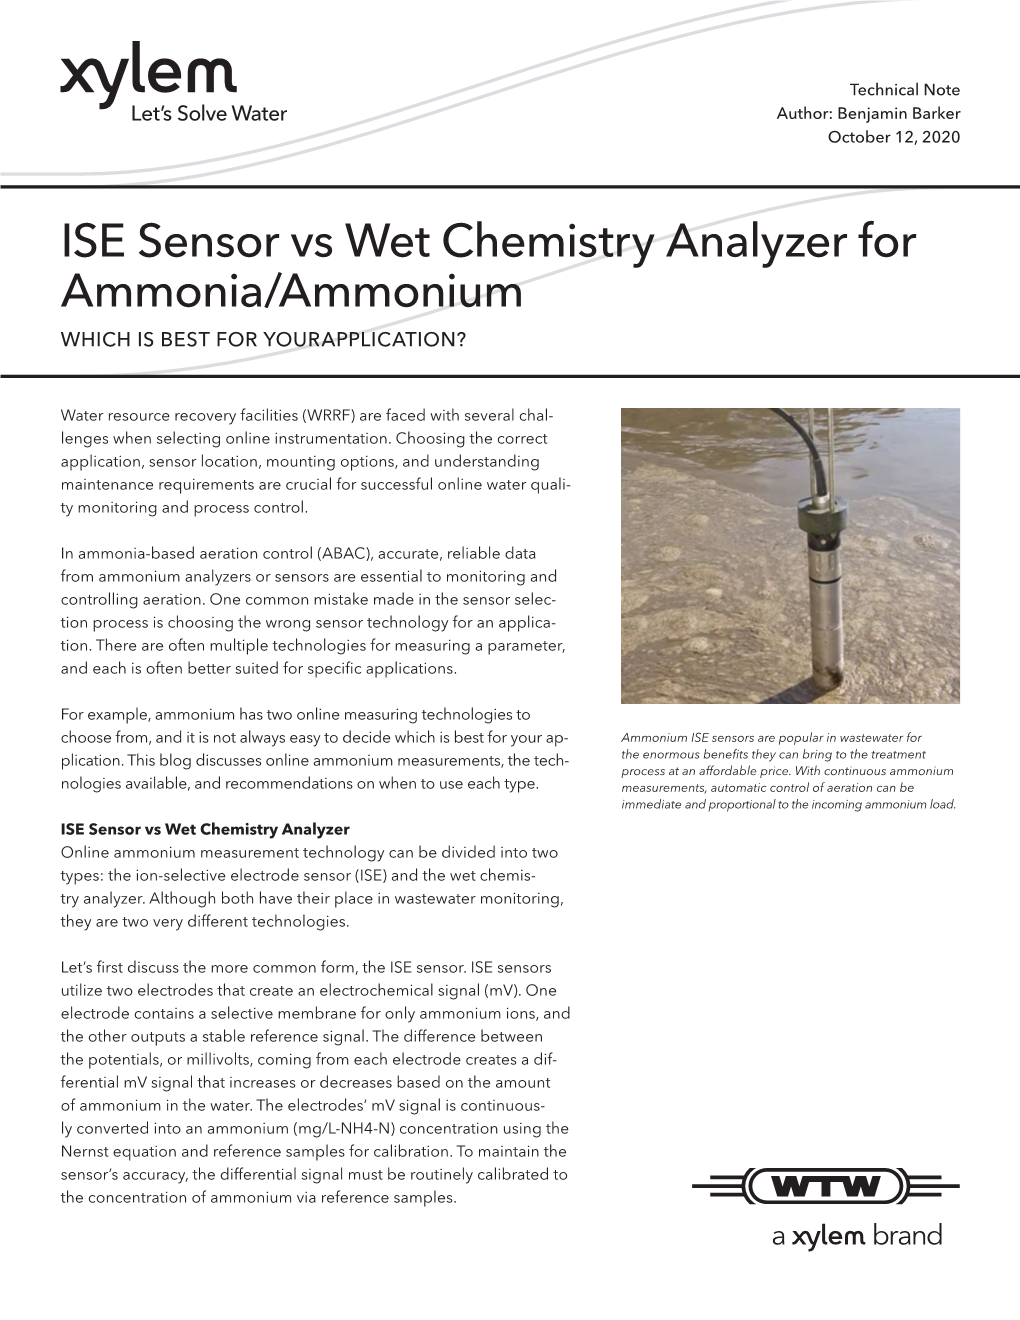 ISE Sensor Vs Wet Chemistry Analyzer for Ammonia/Ammonium WHICH IS BEST for YOURAPPLICATION?